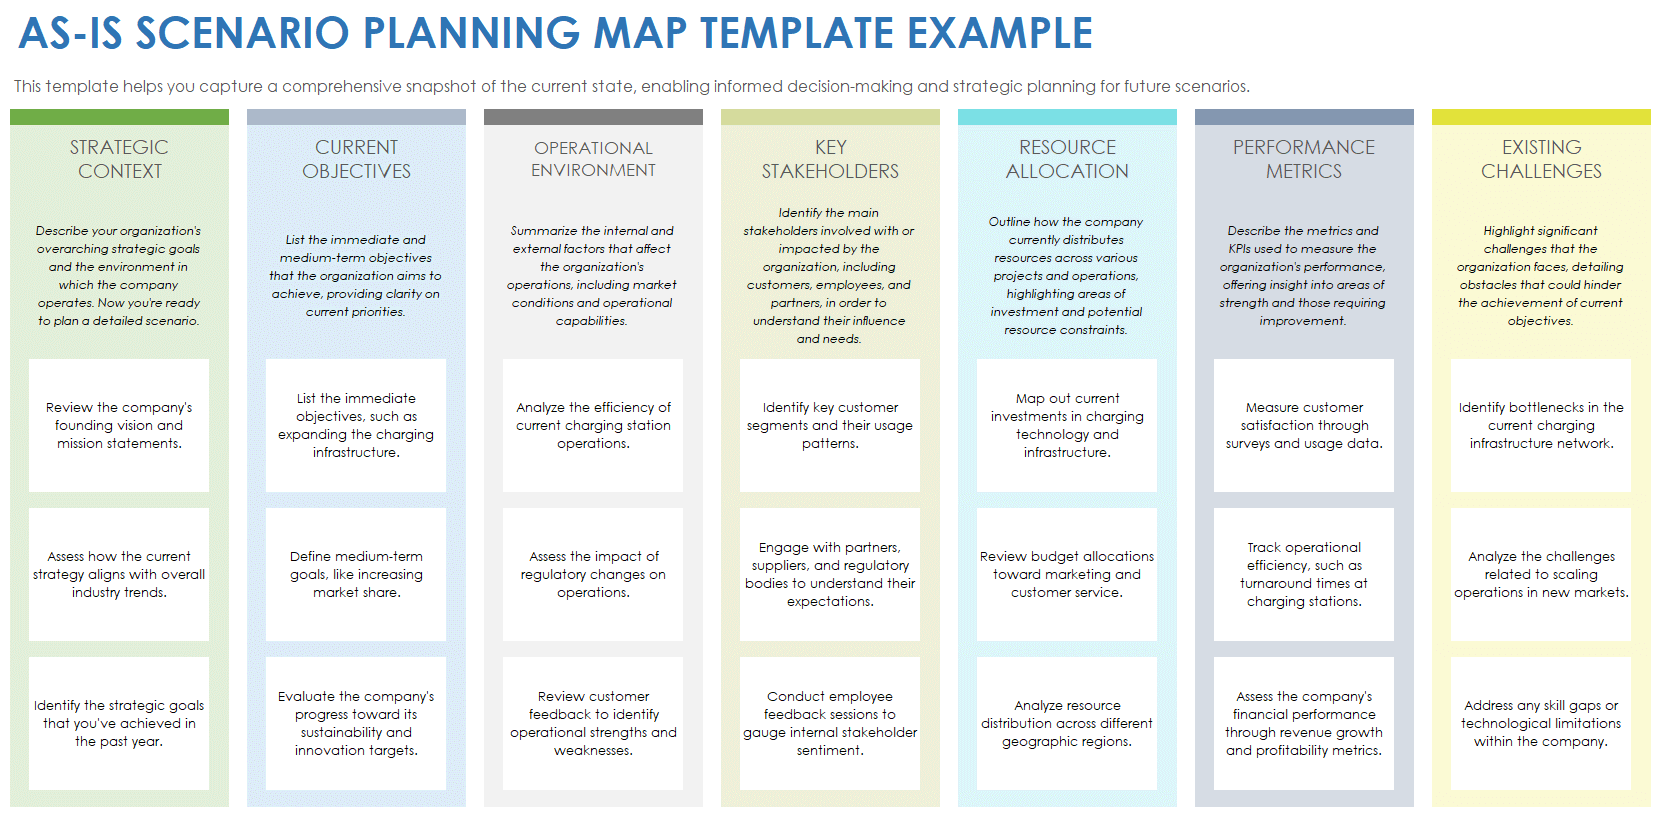 As Is Scenario Planning Map Template Example